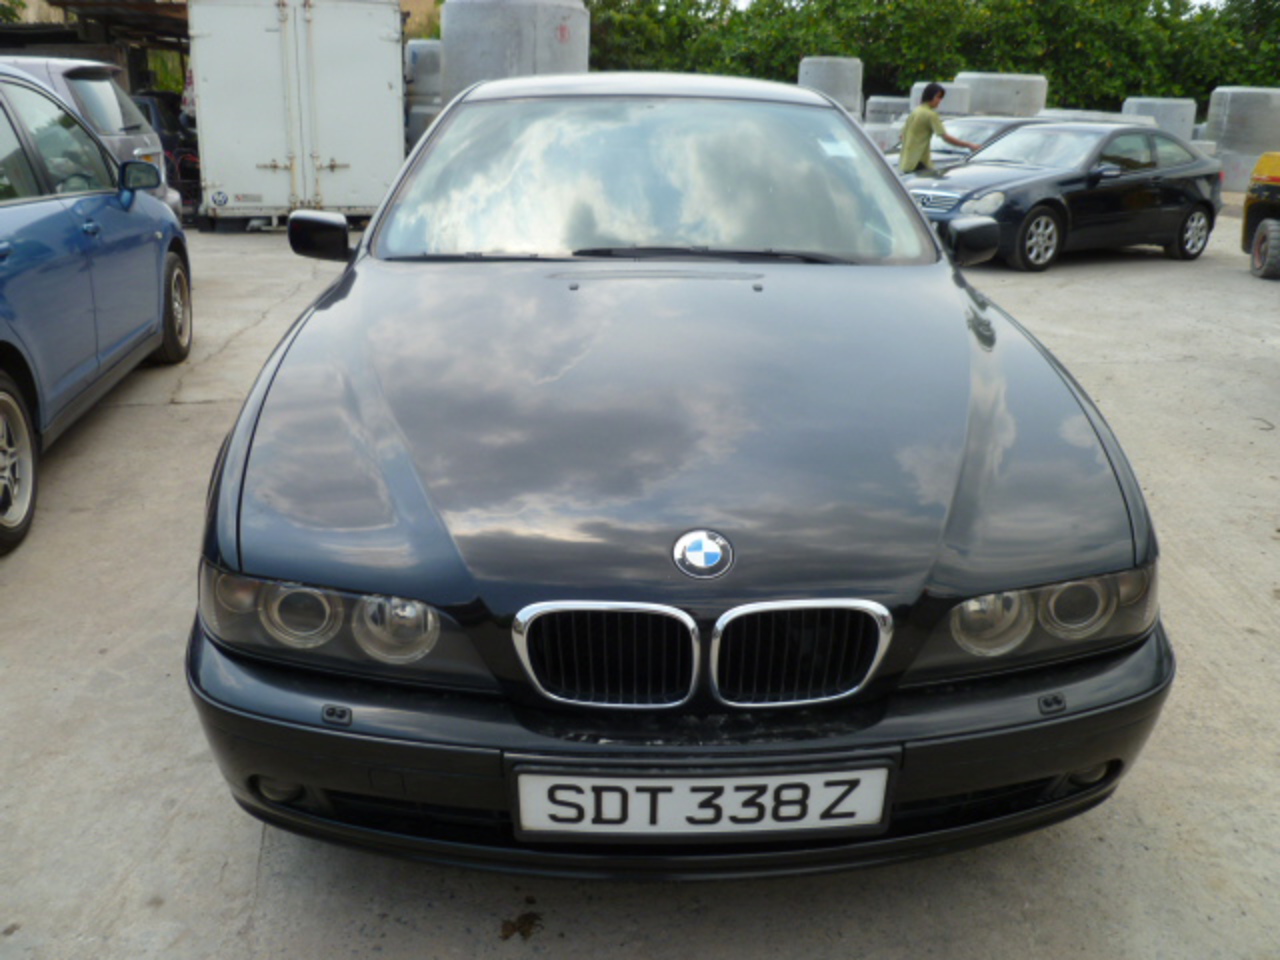 BMW 520IA 2002 - Used Car Singapore Used Car Exporter Cars Exporters Used